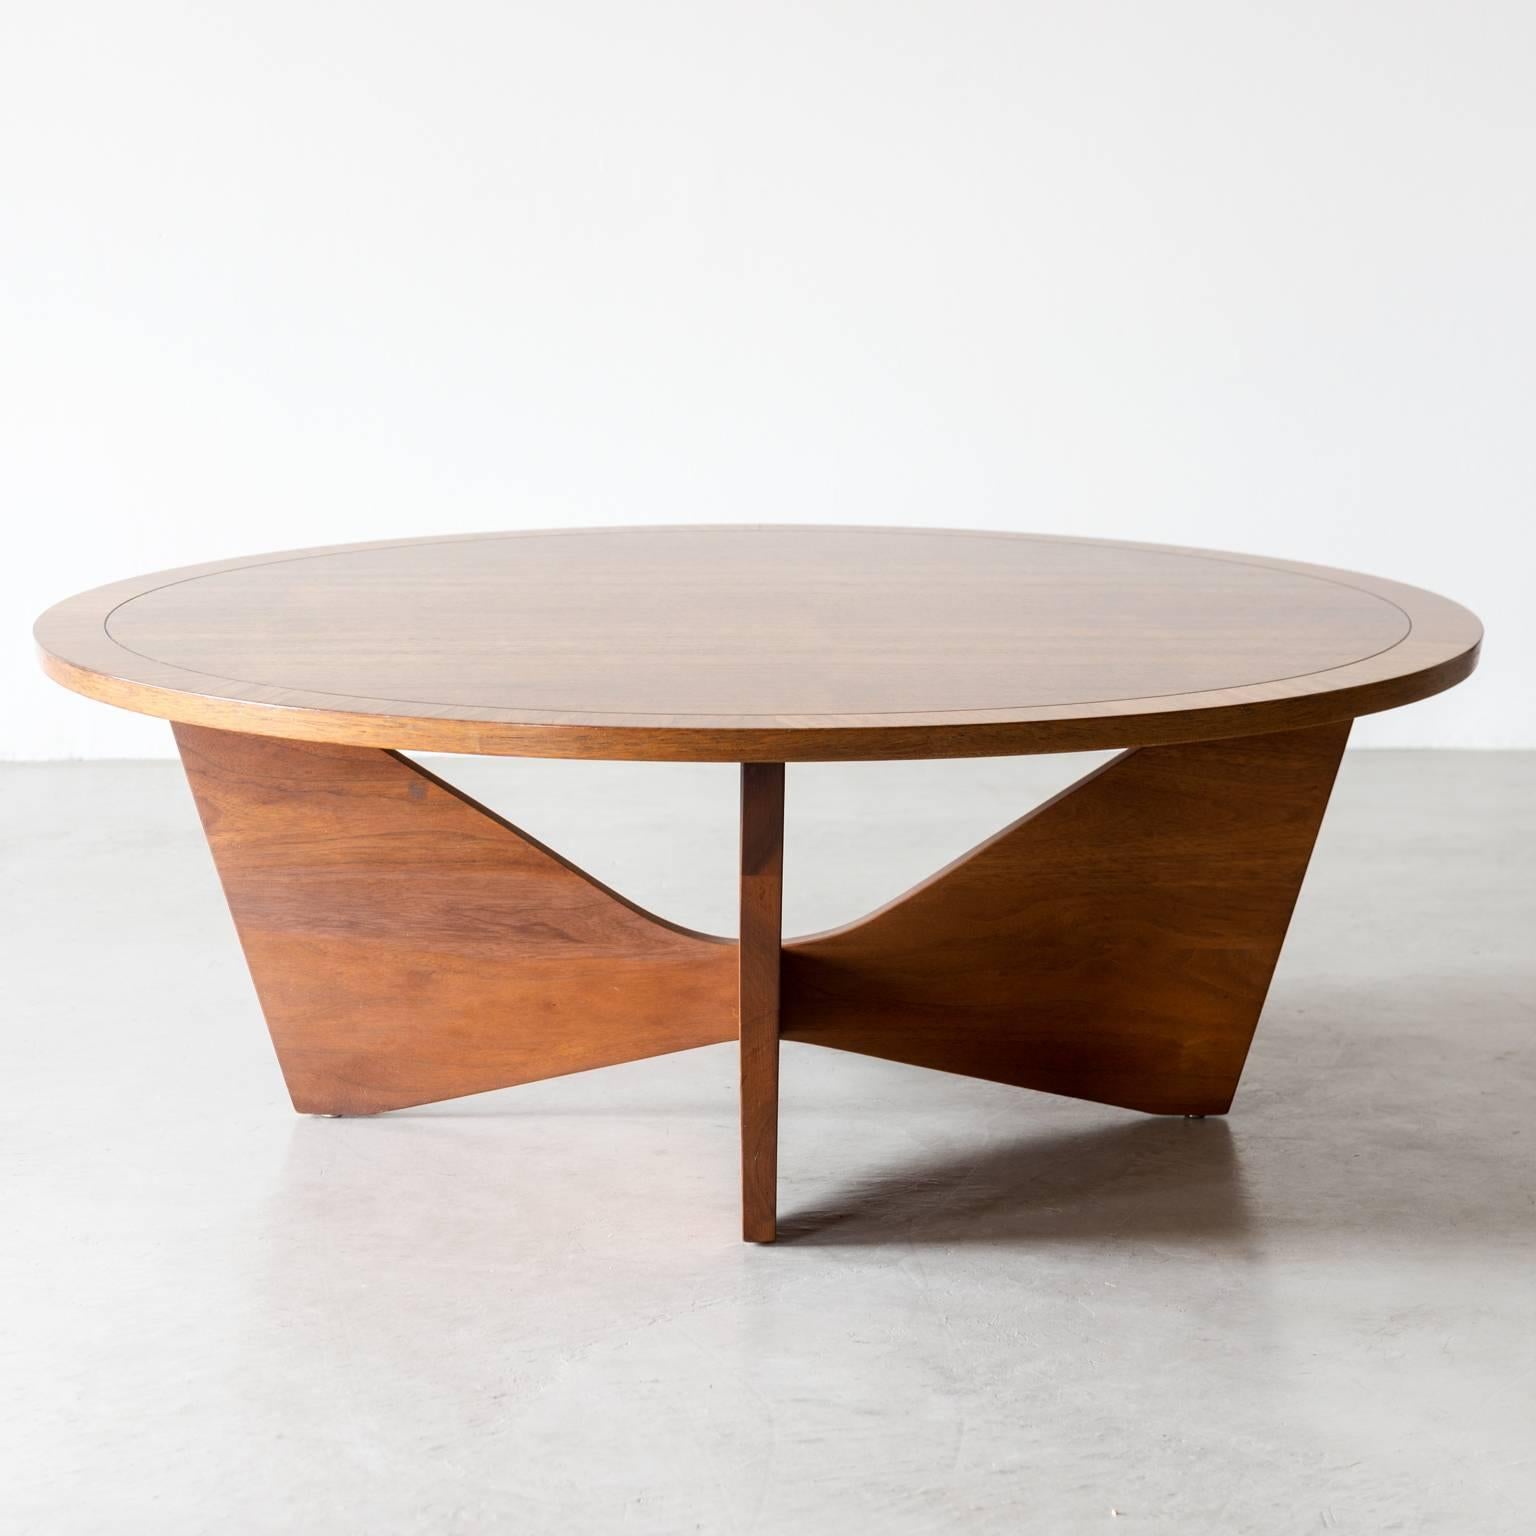 A rare round coffee table by George Nakashima, model 260-L, for Widdicomb, 1962. Branded with "George Nakashima", with Widdicomb label, stamped "Sundra". In laurel with solid walnut base.